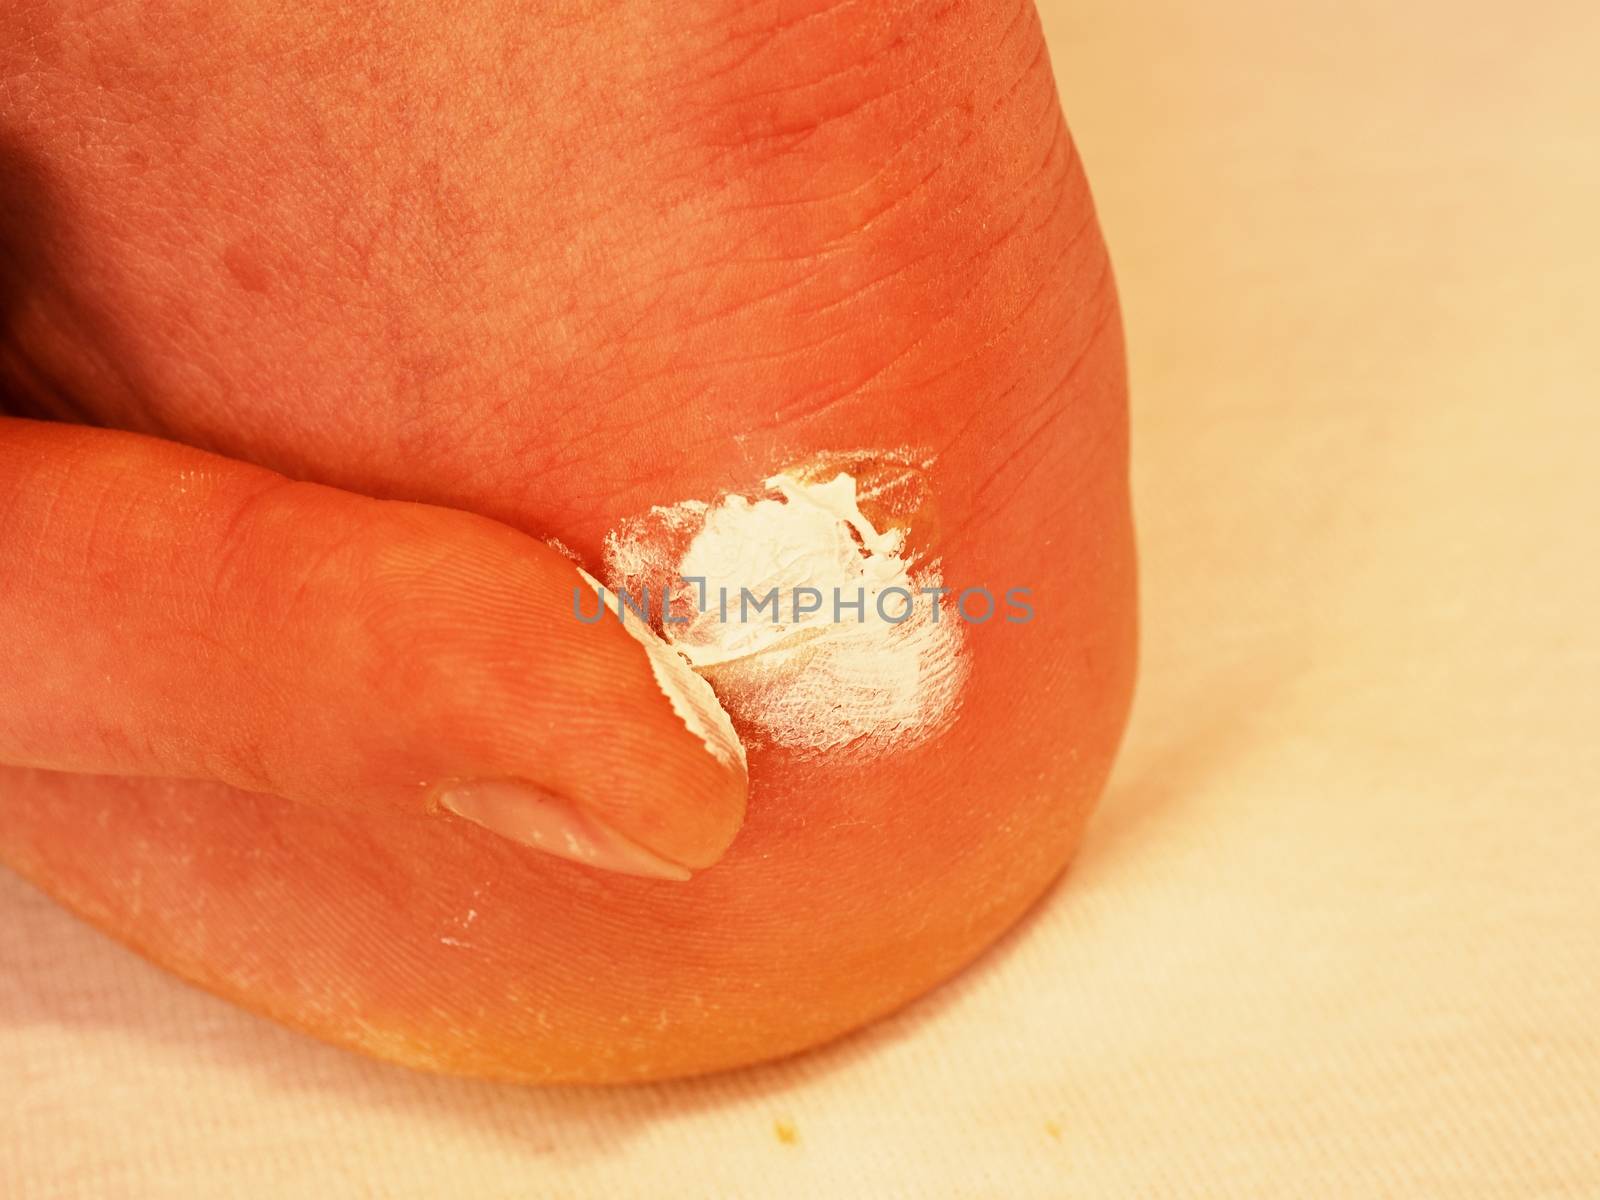 Hand drying and cleaning cracked bloody blister on heel. A painful place with torn skin, bloody and wetted wound with skin tresses. The clean wound is treated with a white healing ointment